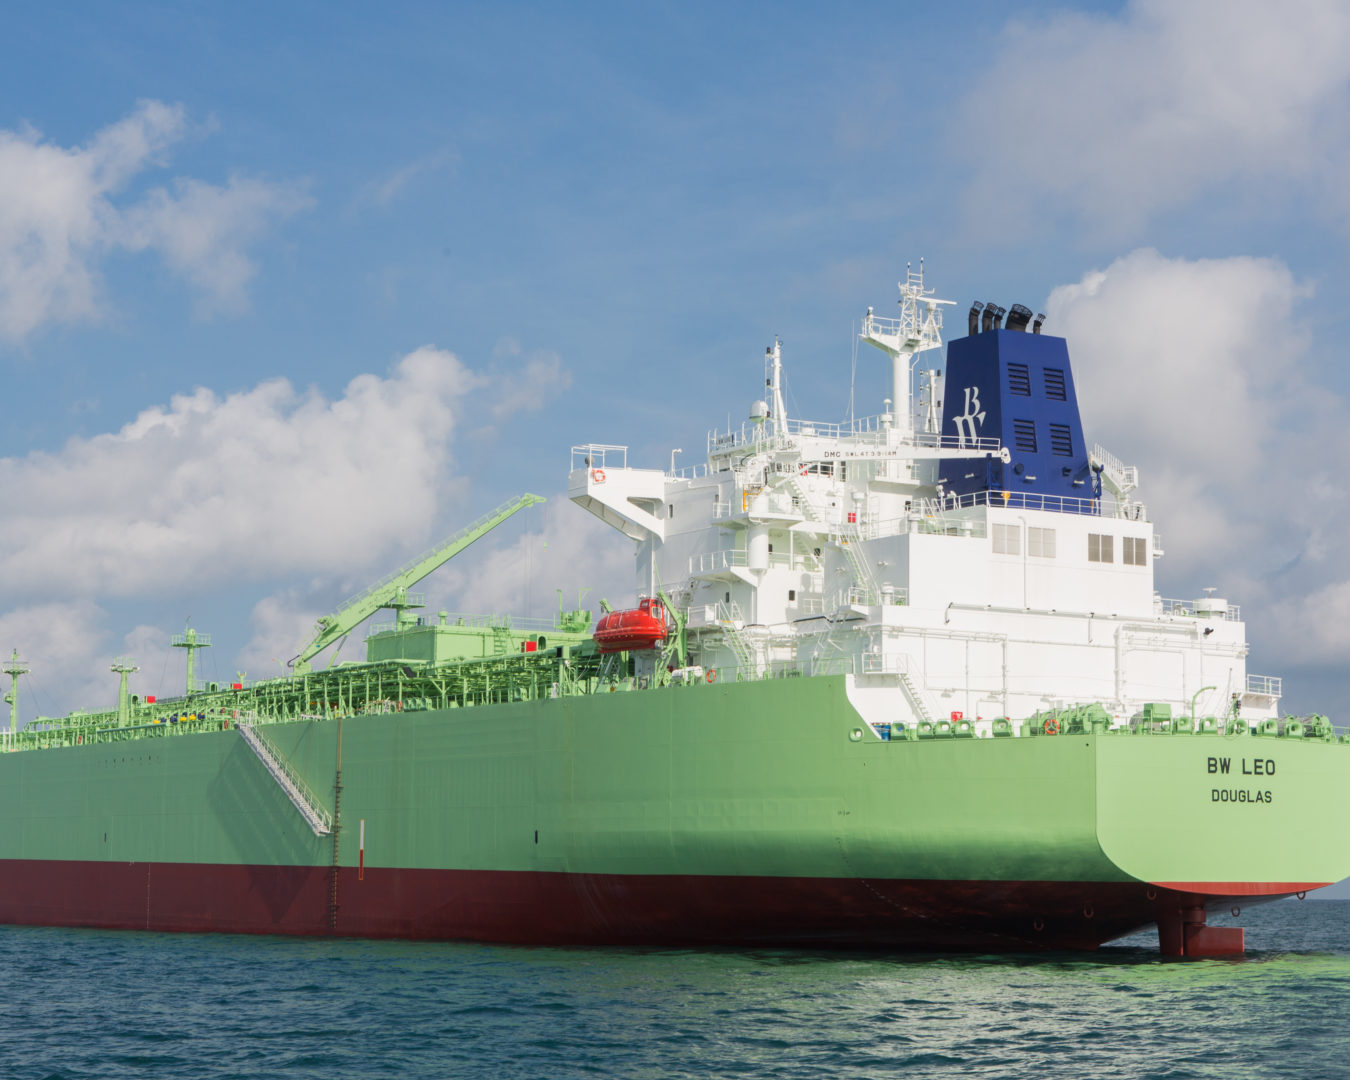 BW Leo is the second VLGC to be retrofitted with LPG dual fuel propulsion technology onboard